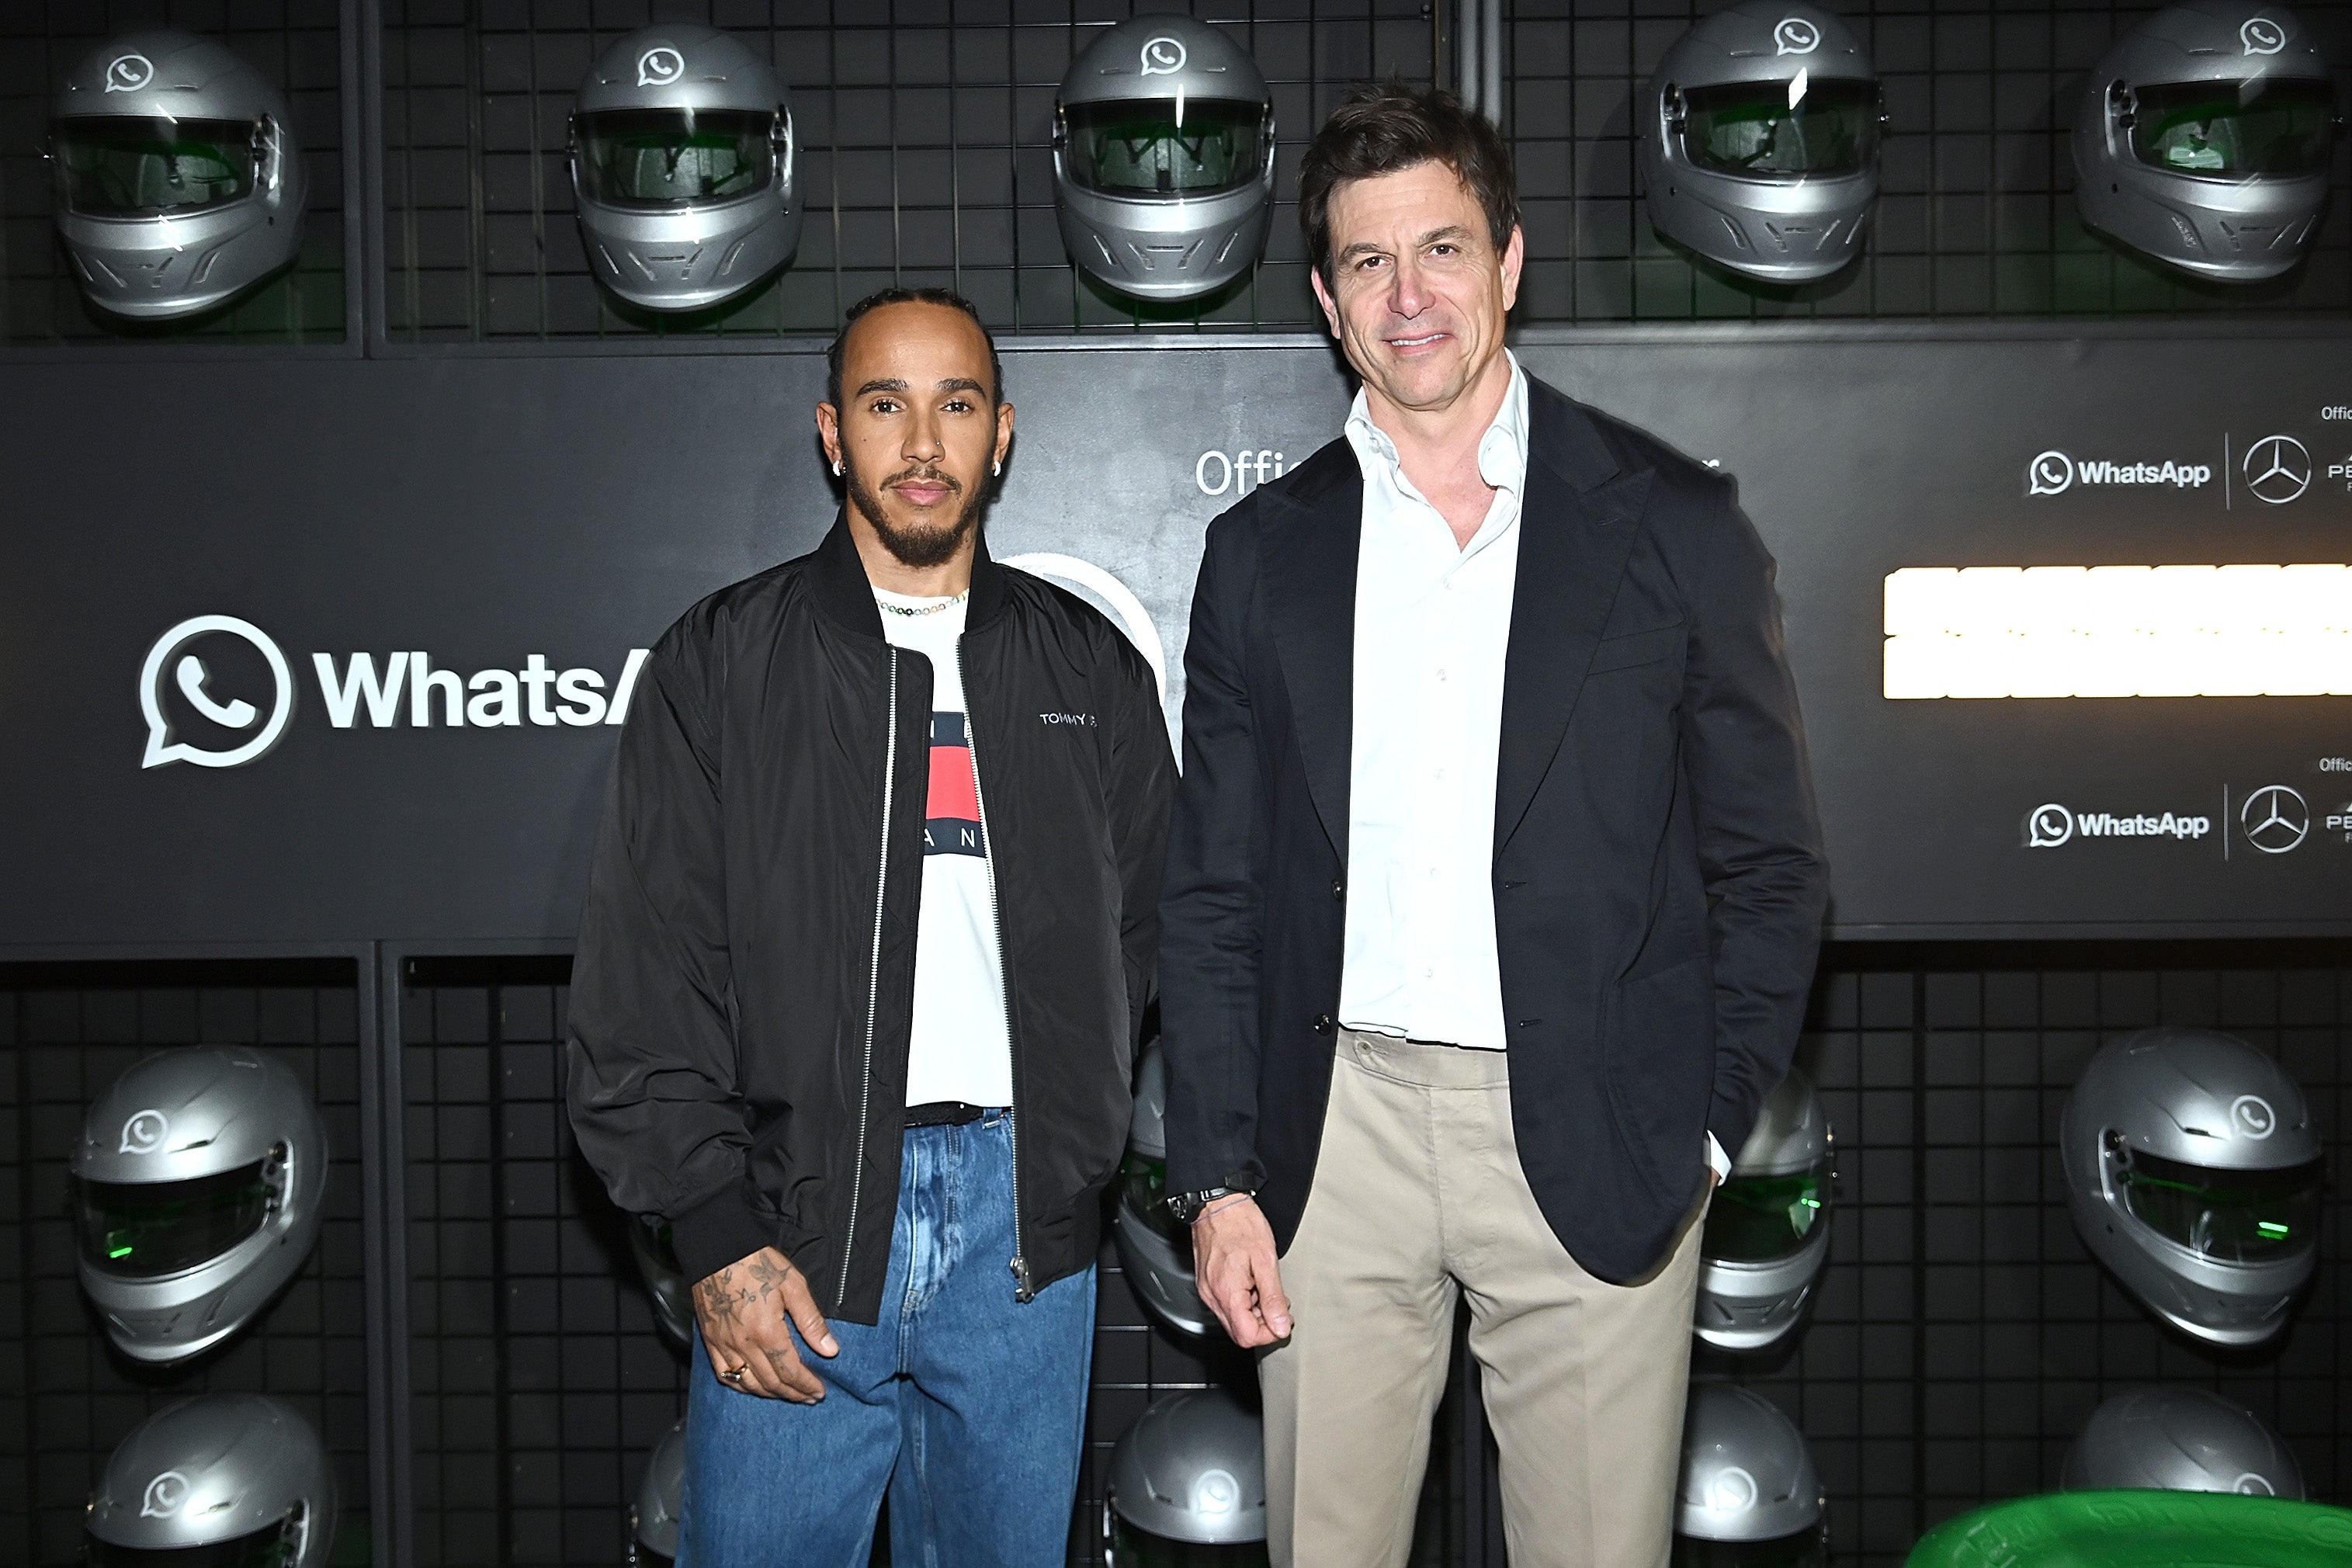 Toto Wolff was at a Mercedes and WhatsApp event in New York with Lewis Hamilton on Monday